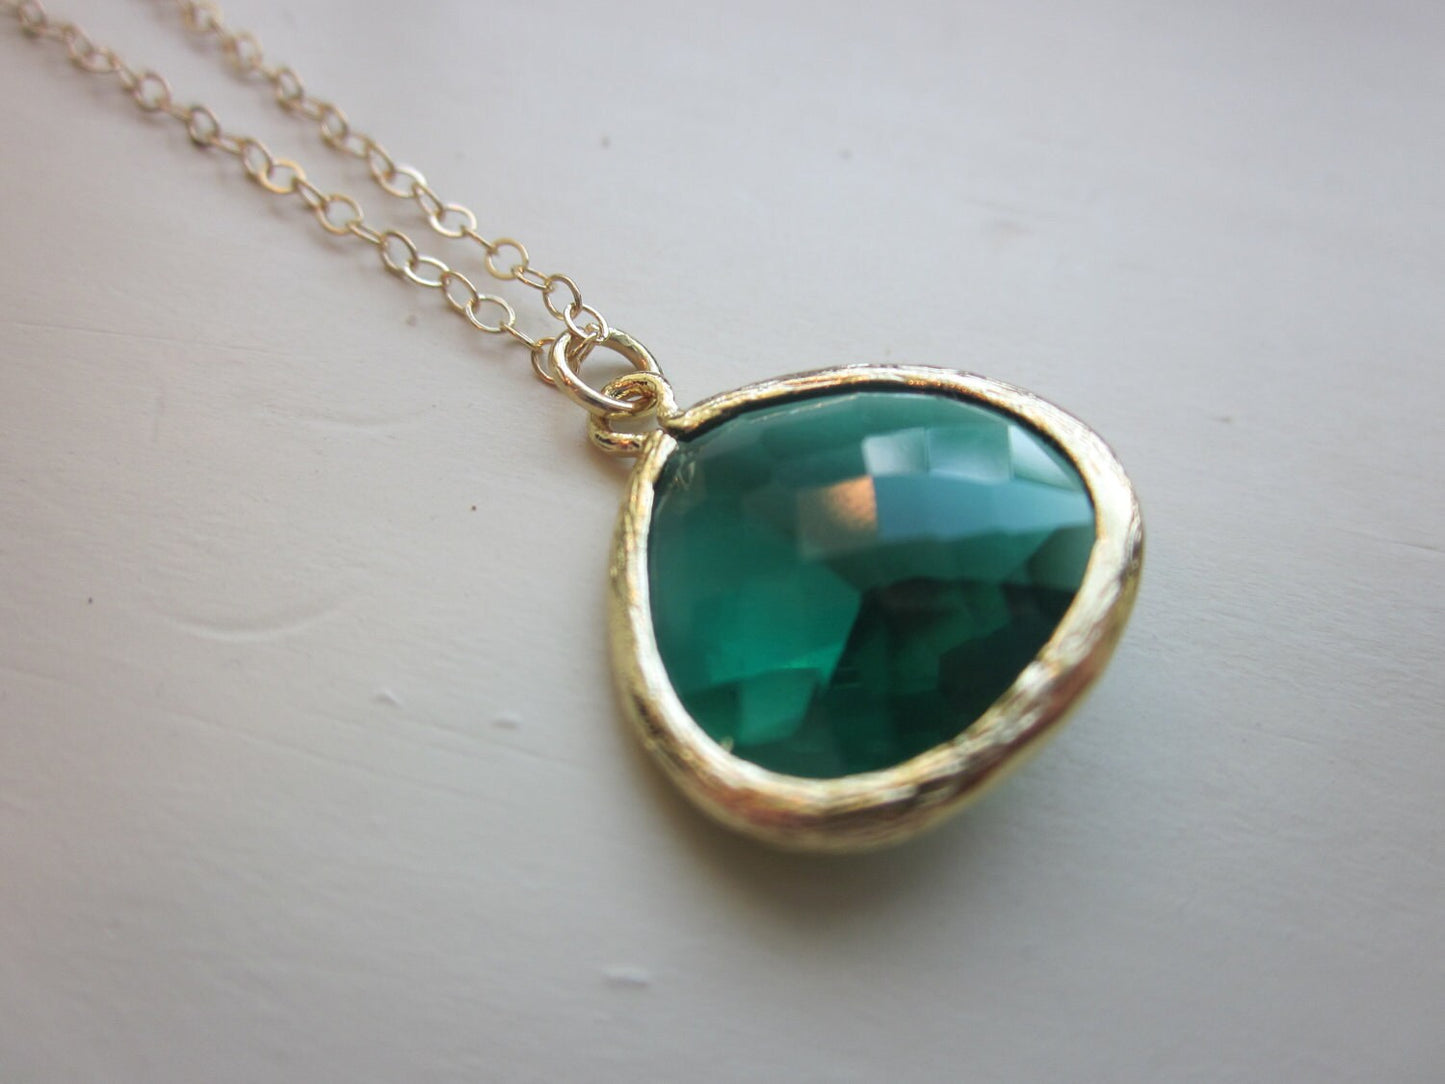 Emerald Green Necklace Gold Plated Large Pendant - Gold Filled Chain - Wedding Jewelry - Bridesmaid Jewelry - Valentines Day Gift